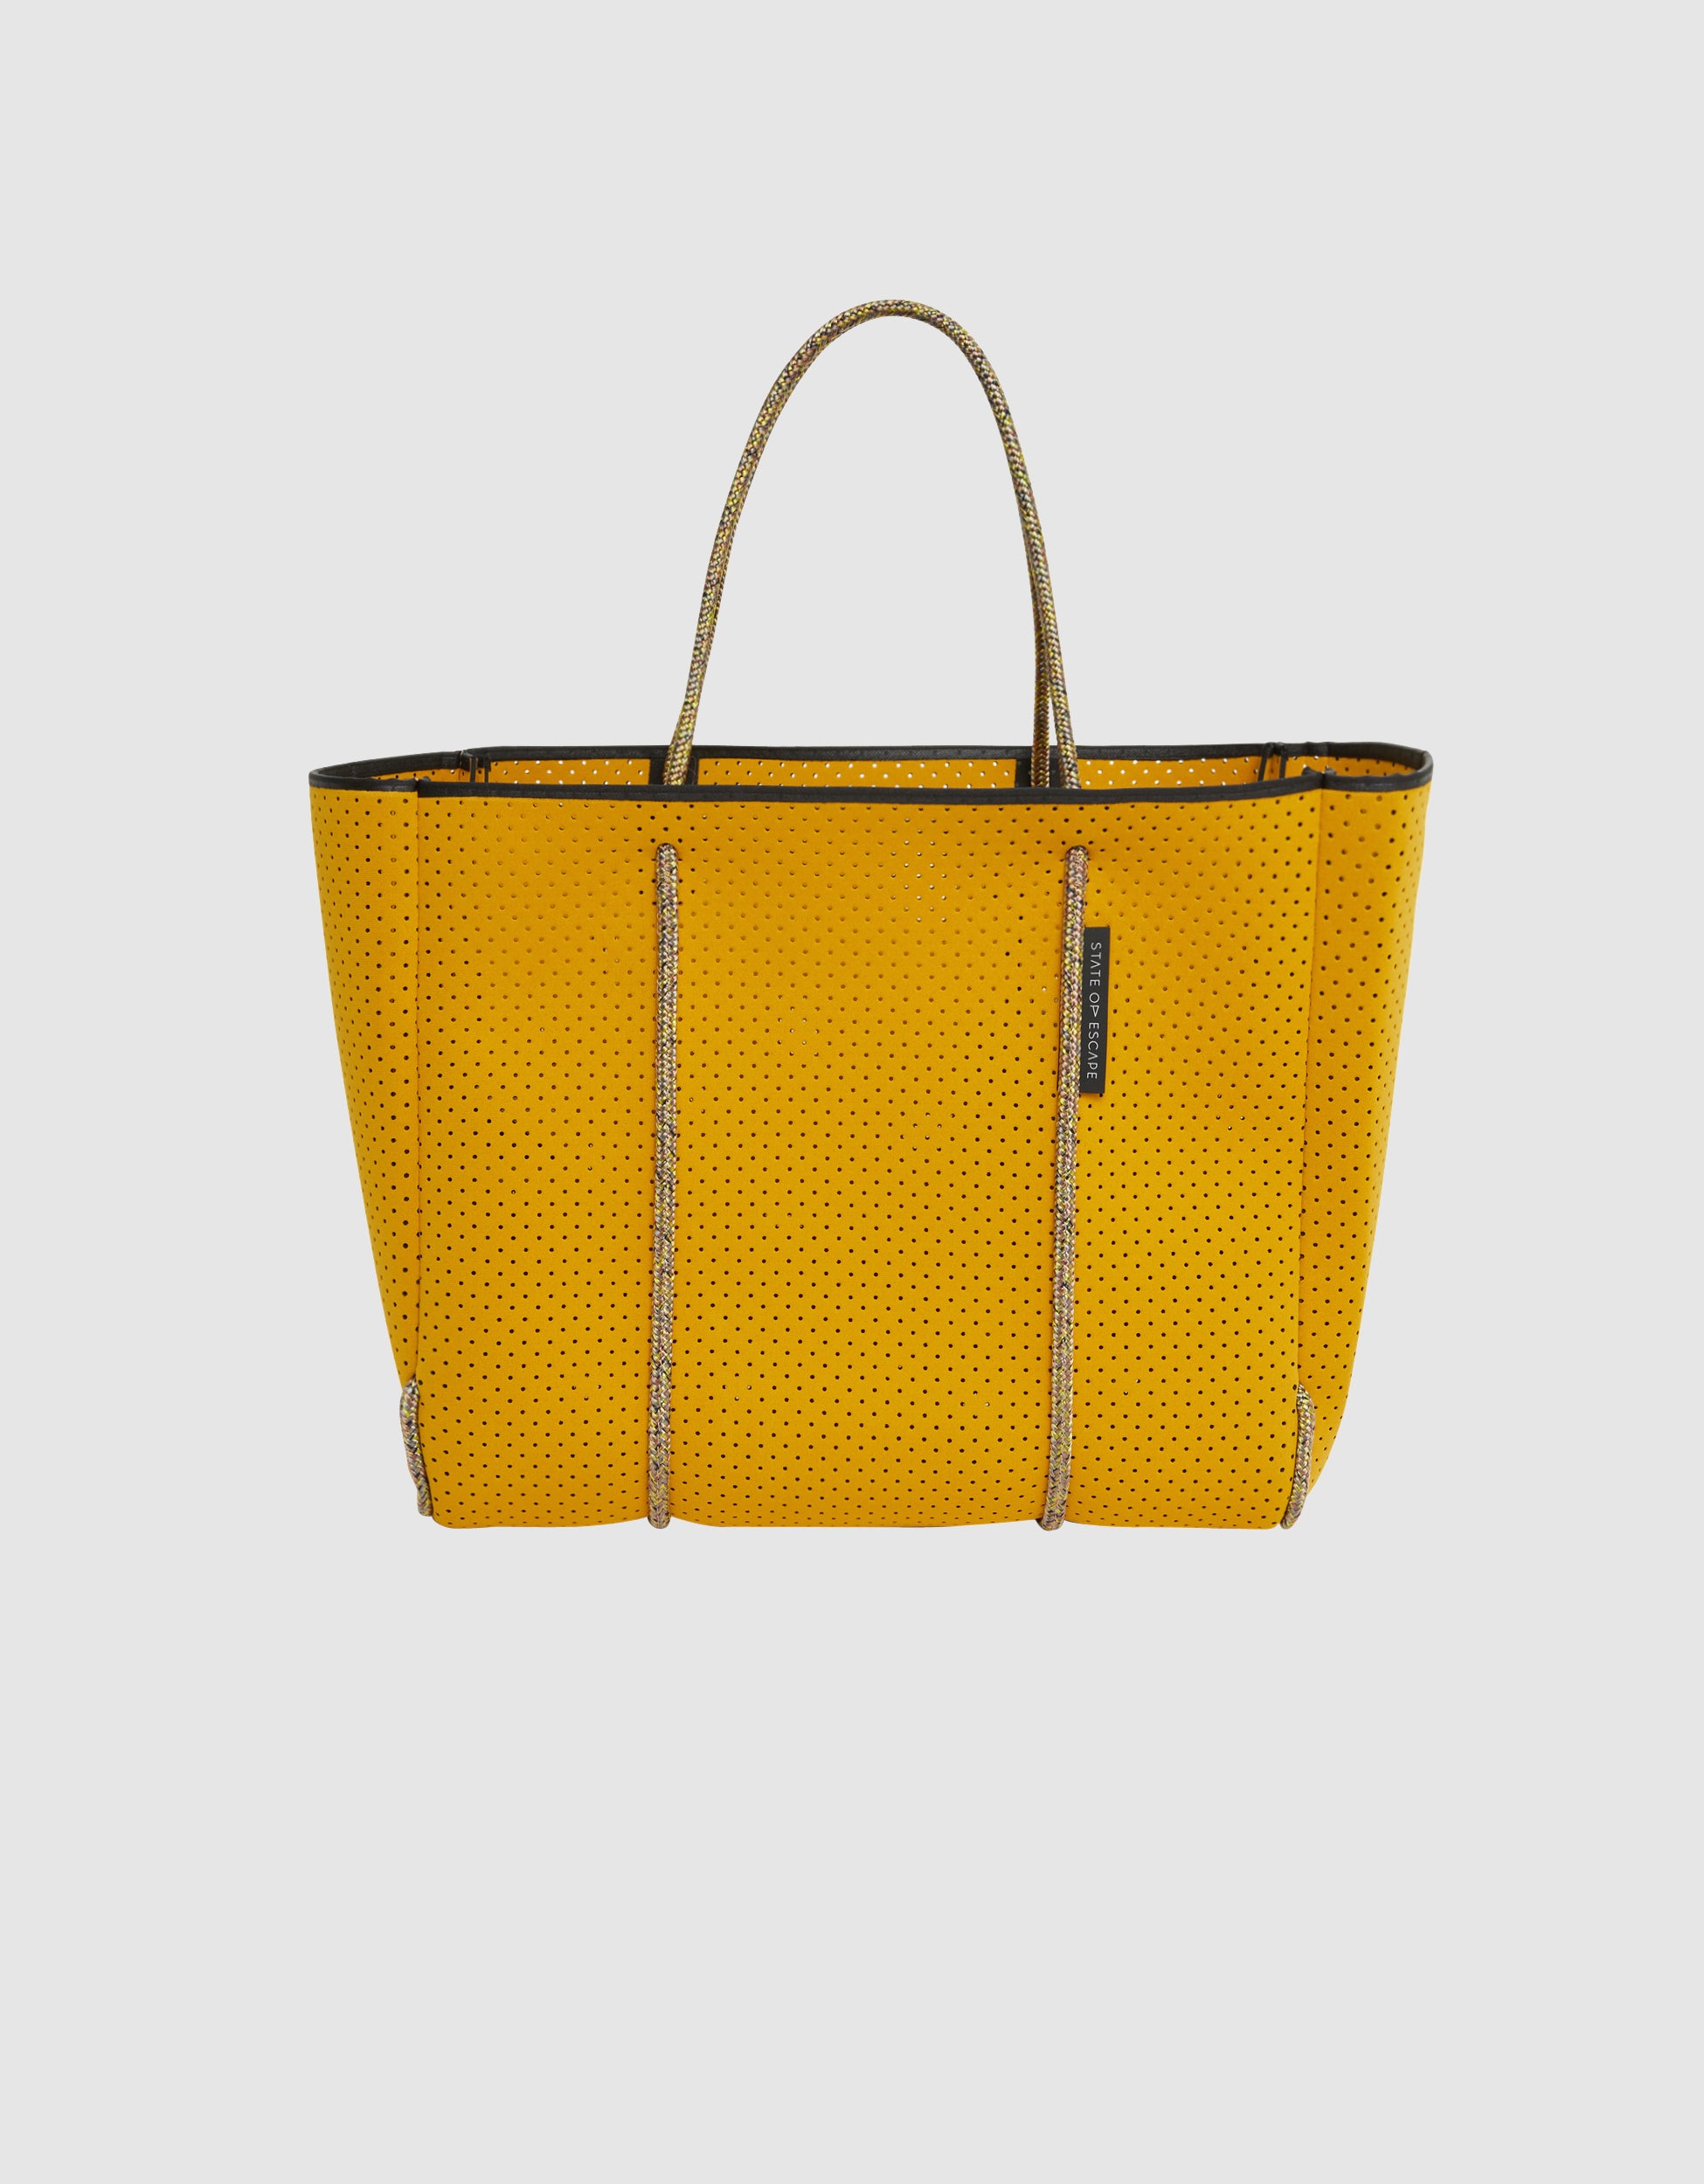 Flying Solo tote in amber – State of Escape